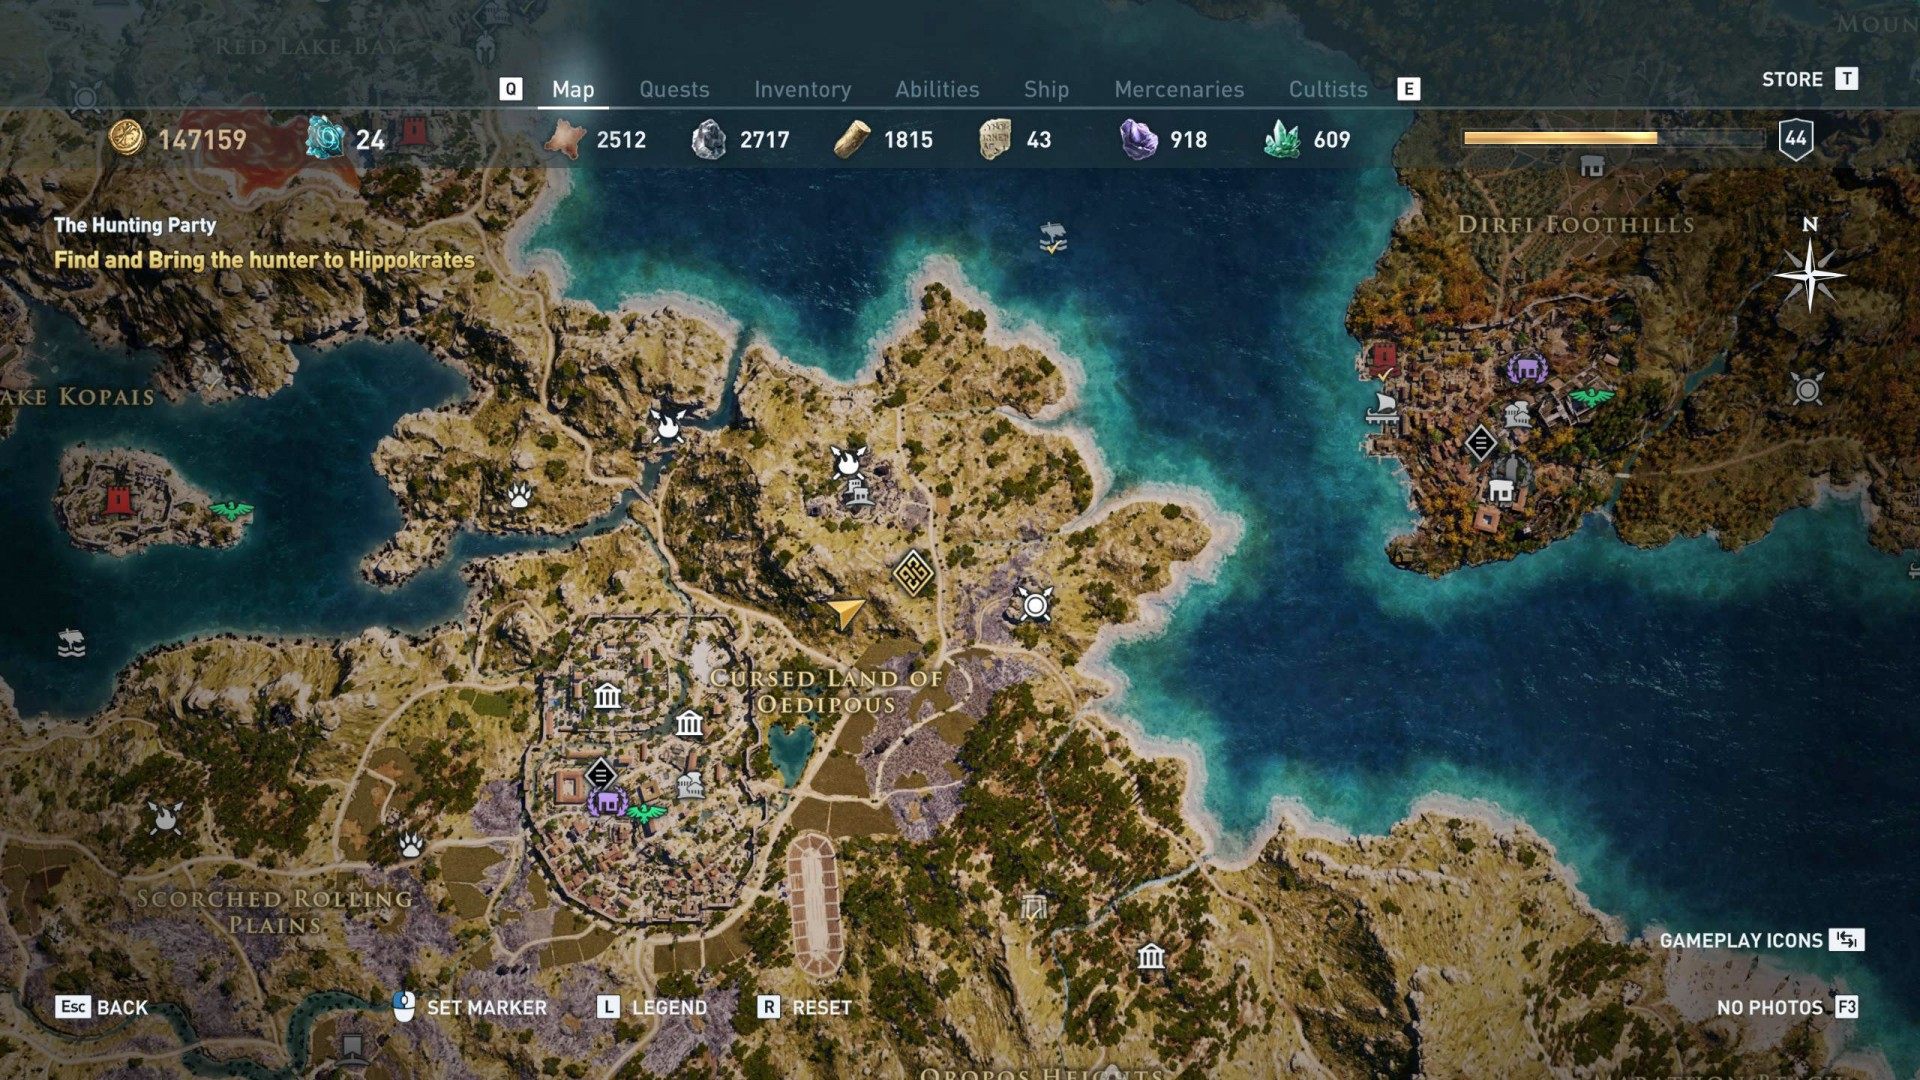 The Hunting Party, Assassin's Creed Odyssey Quest